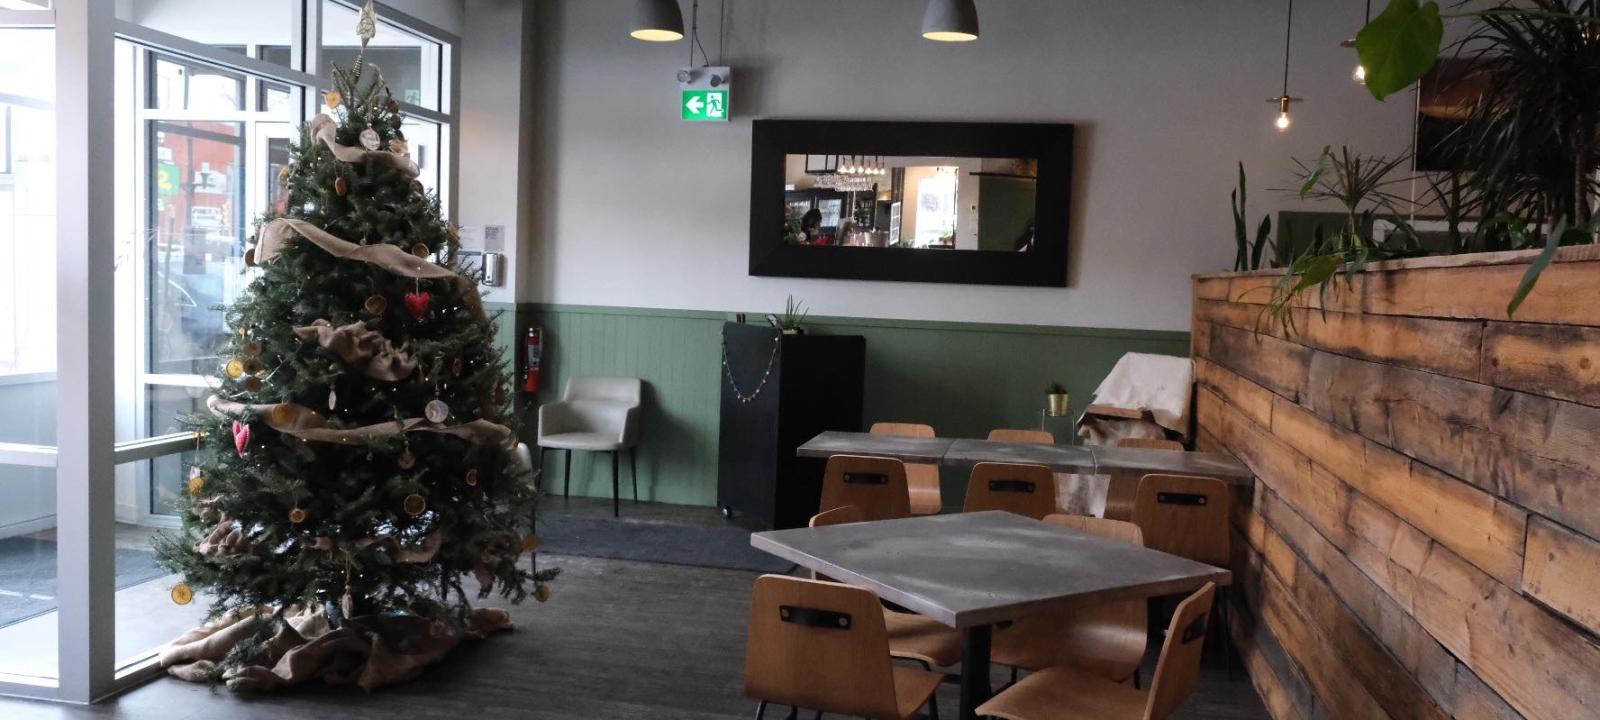 Treat yourself (or someone else) with local eats this holiday season in Saskatoon